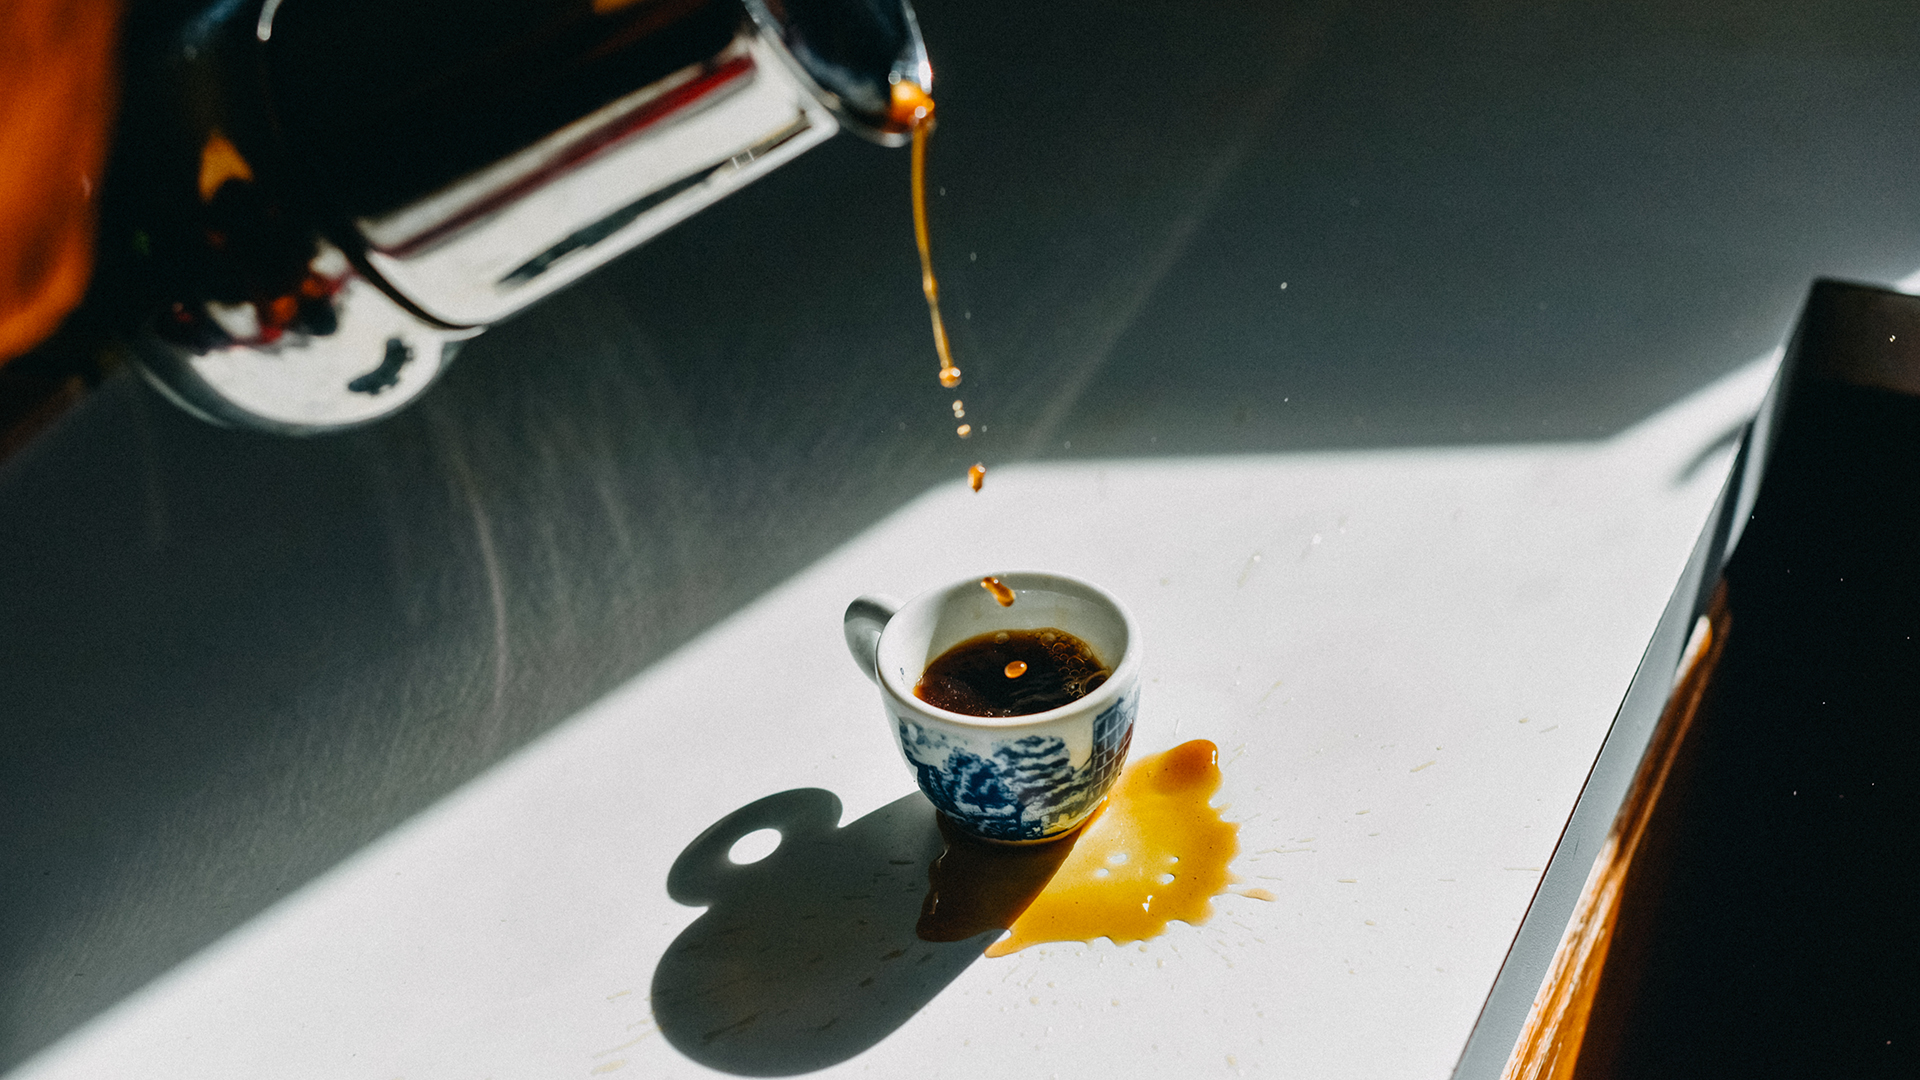 Coffee spilled outside an espresso cup as a mistake. (Getty)